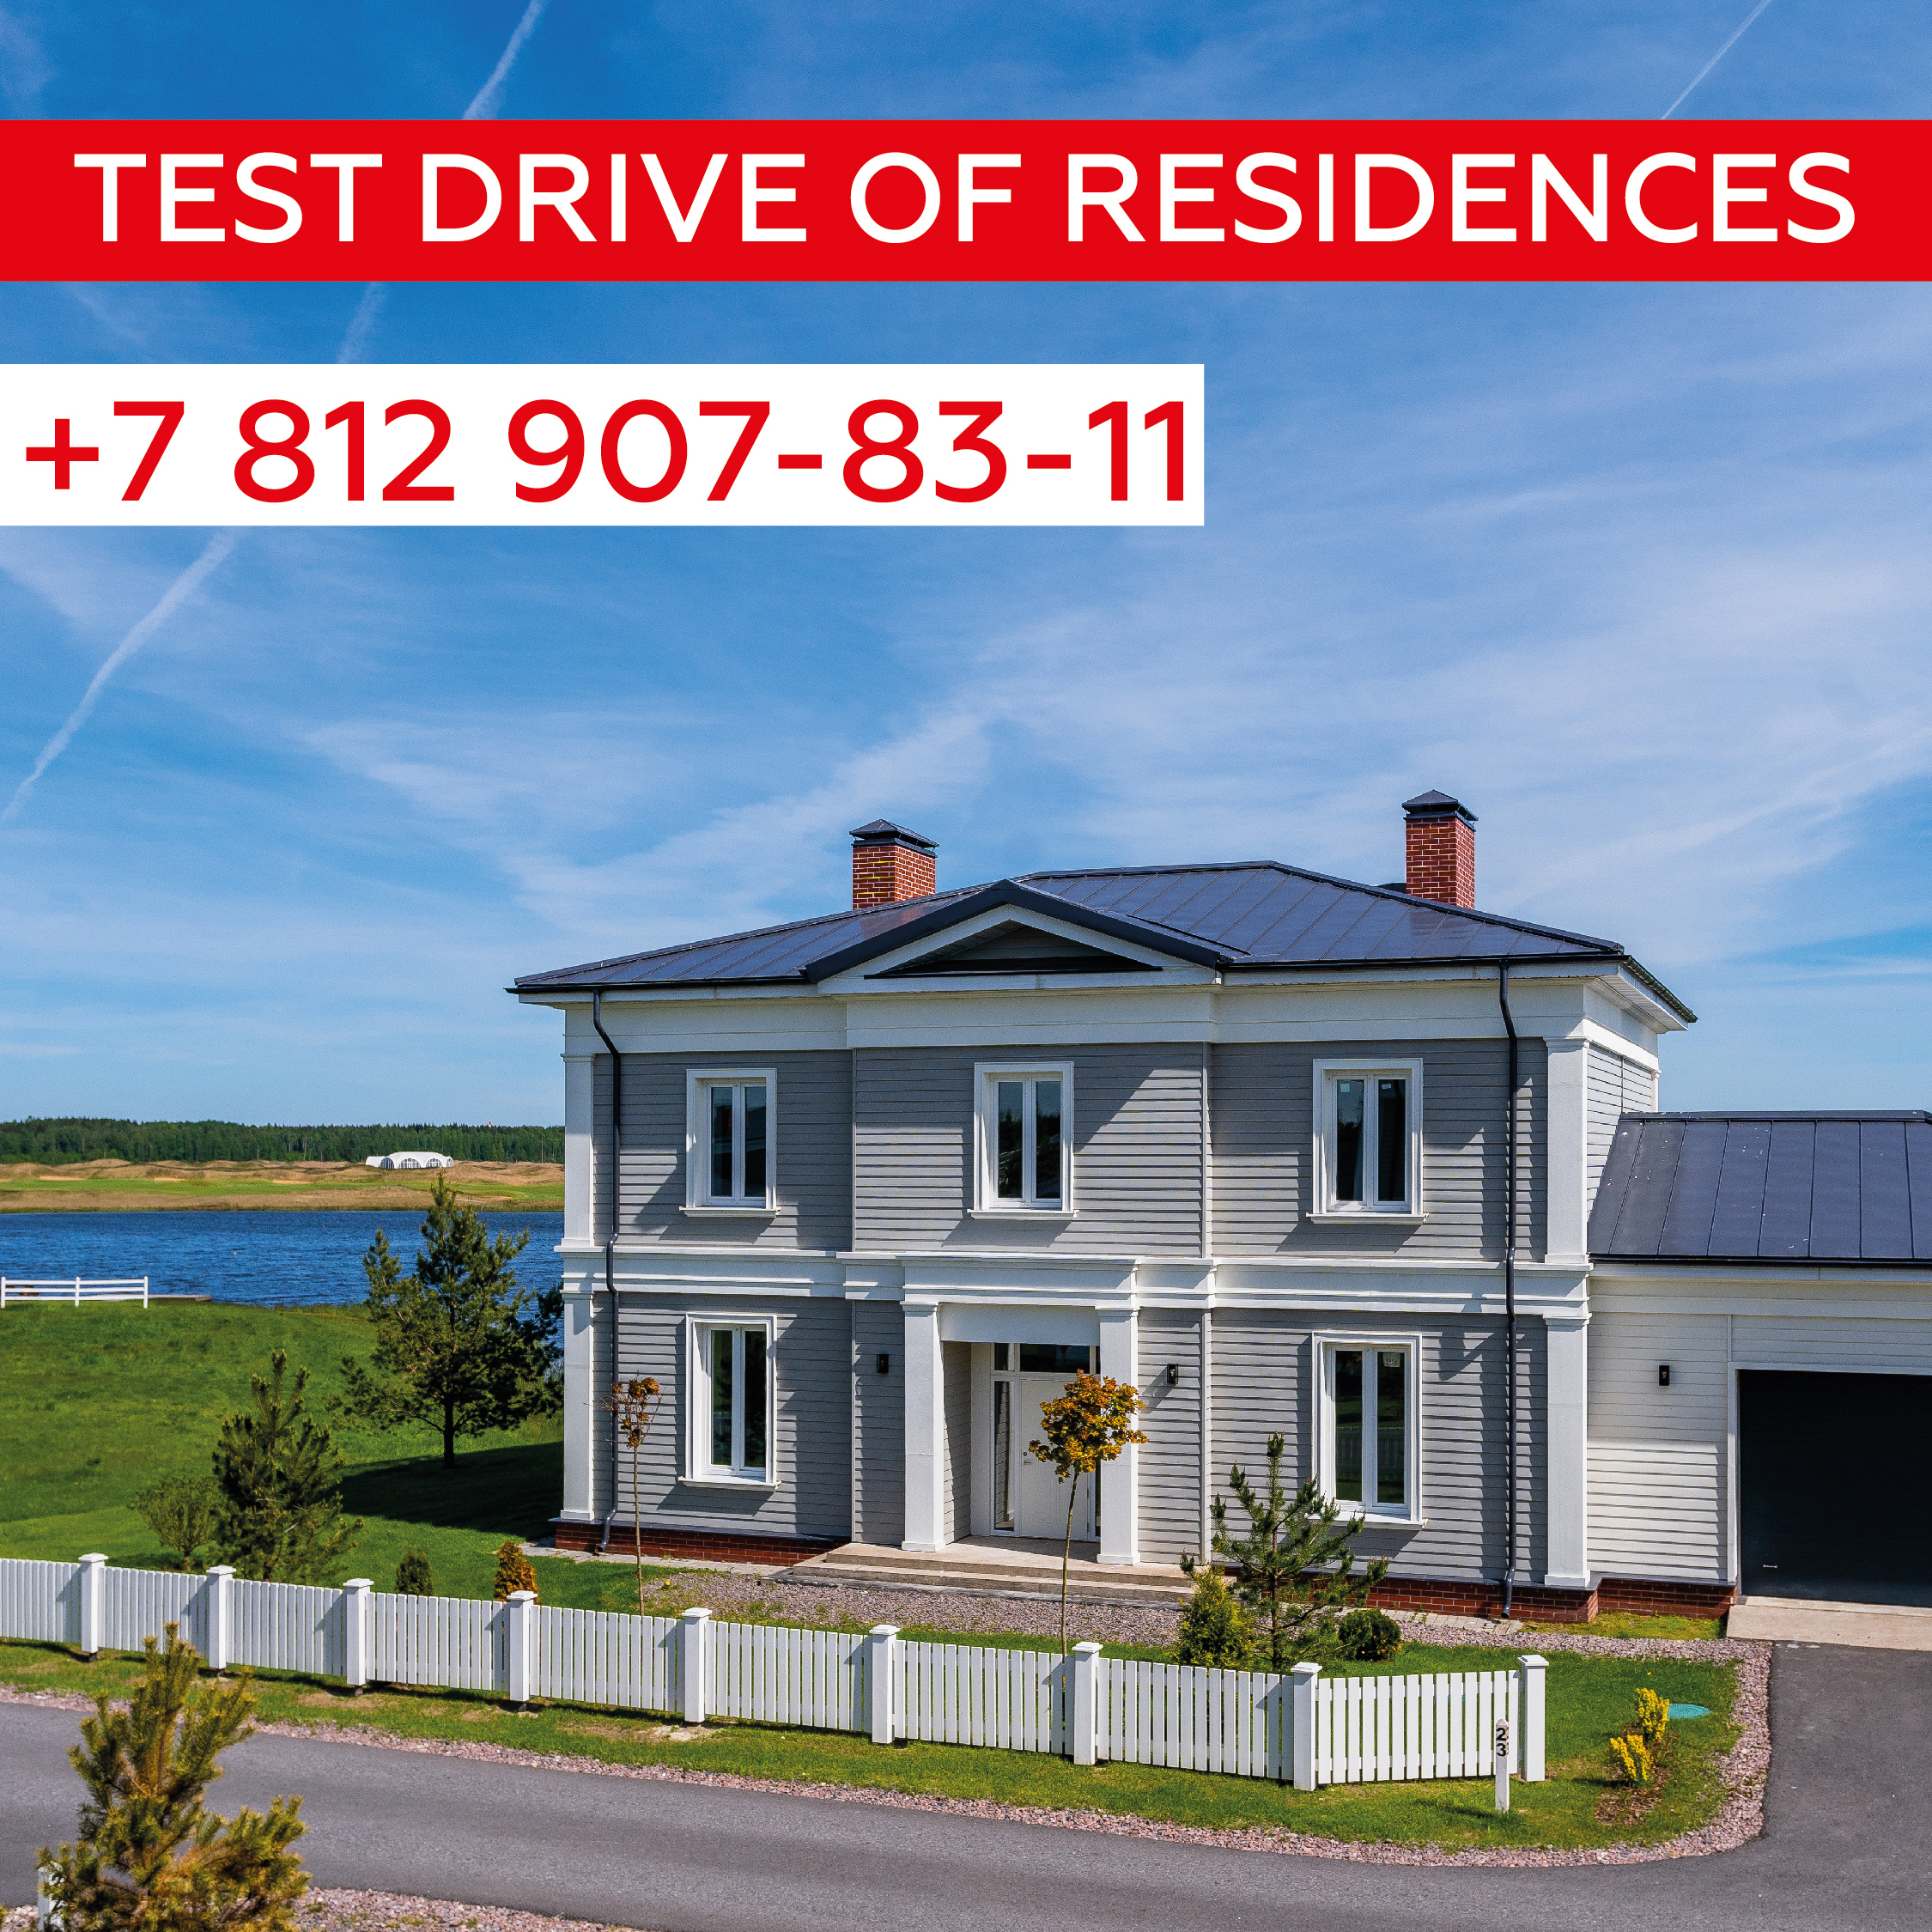 Test drive of residences